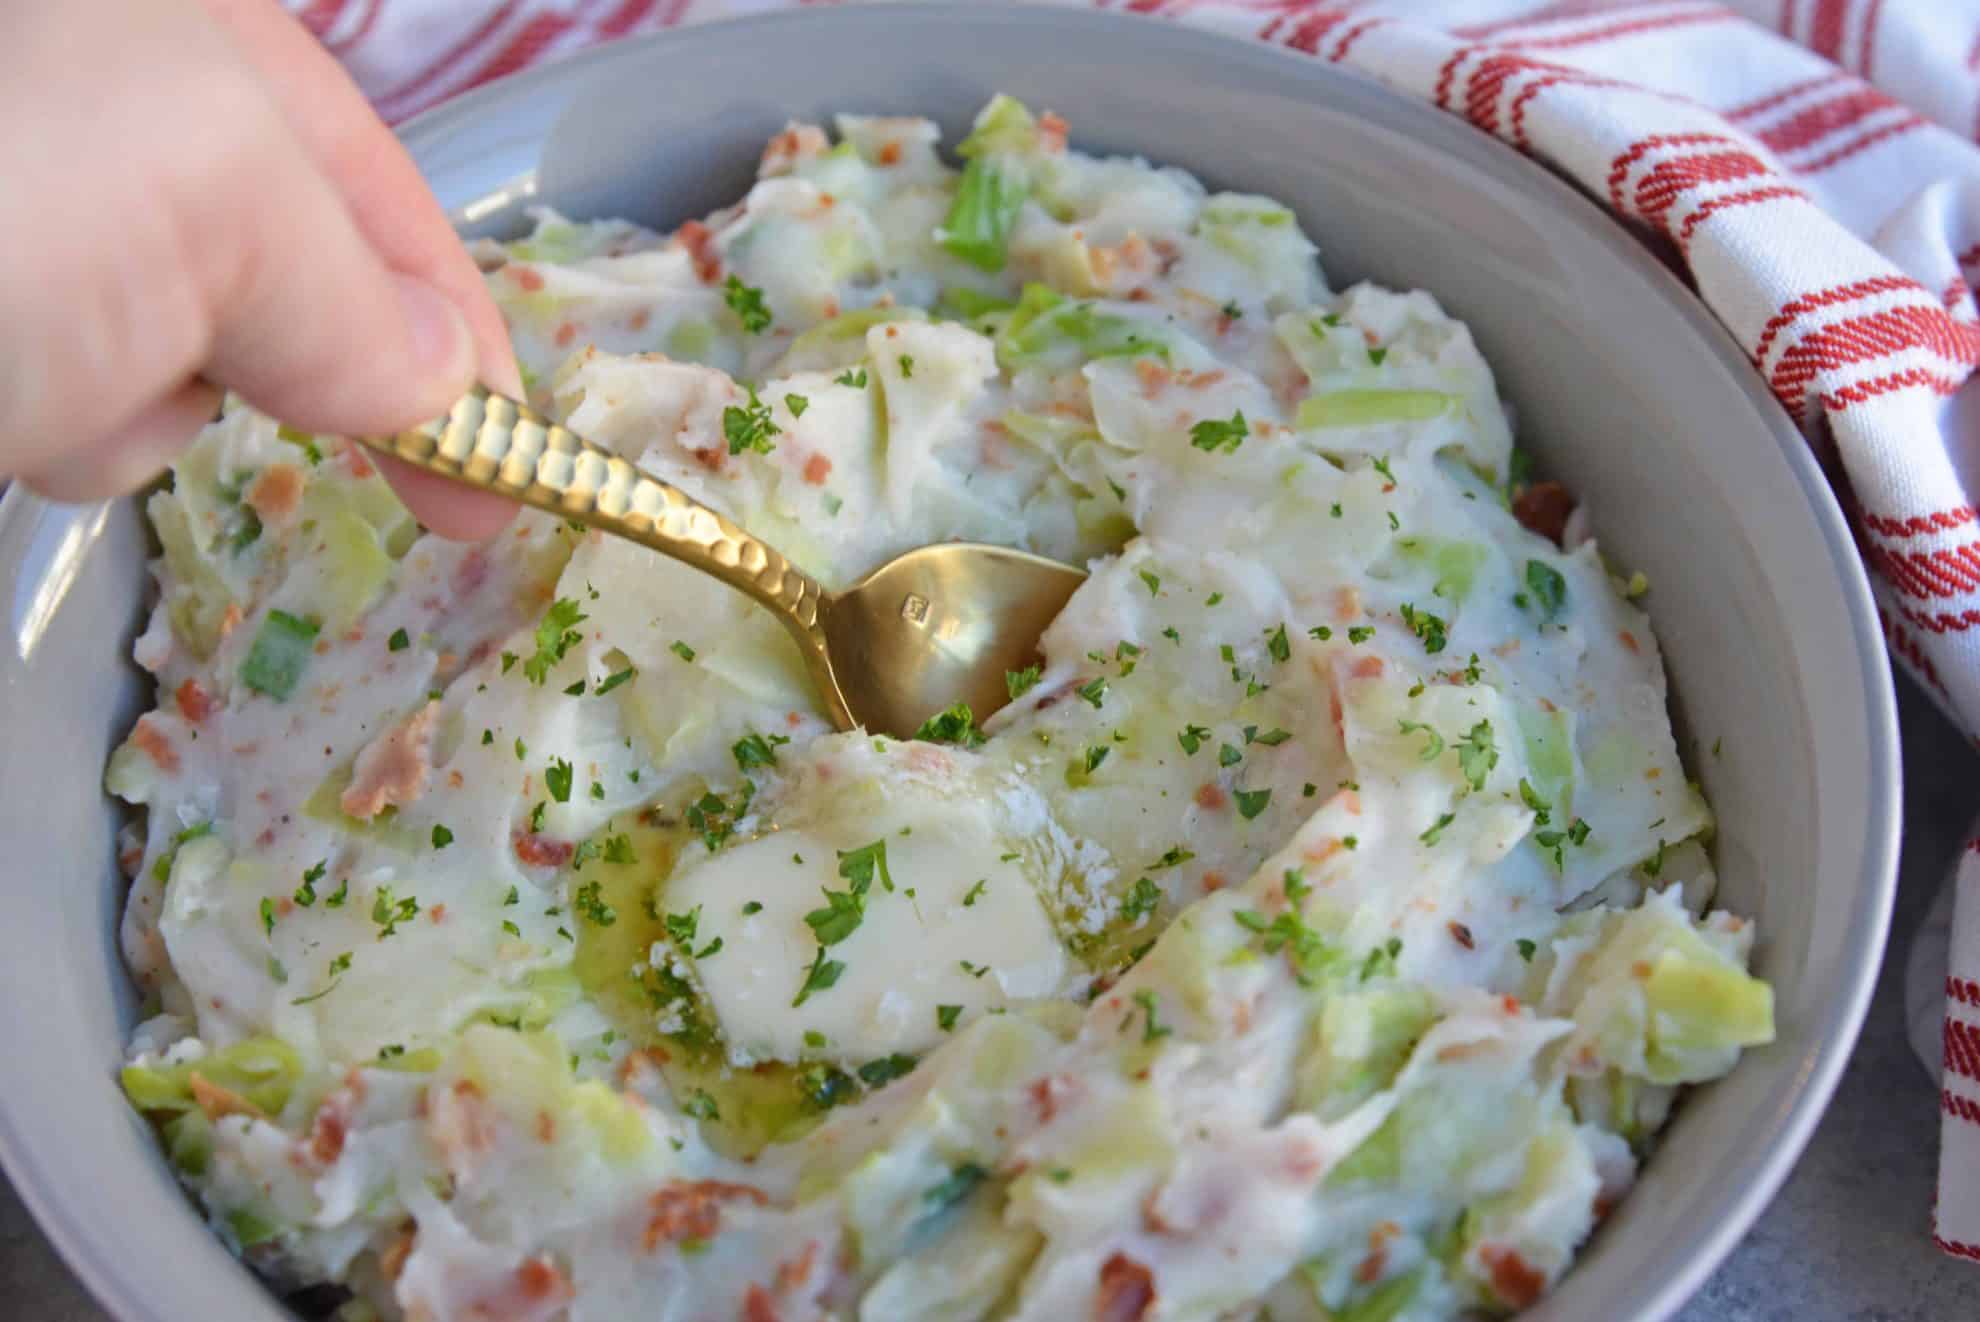 Spoon dipping into Irish Colcannon using cabbage